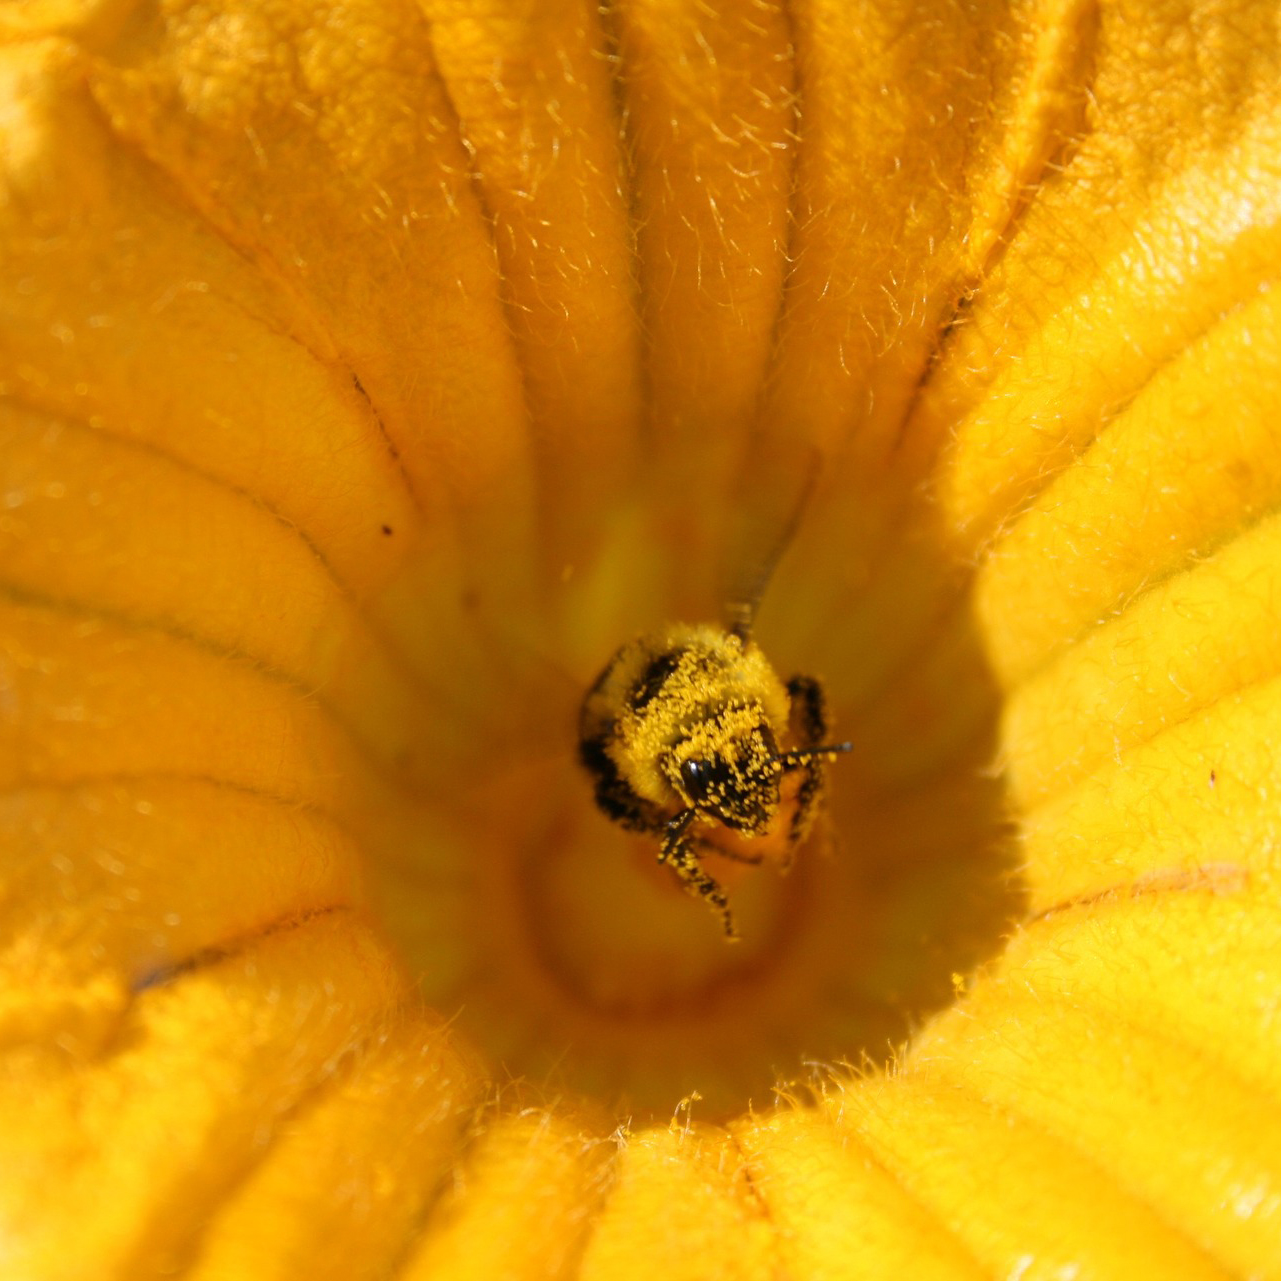 A small bee, covered in yellow grains of pollen, sits atop a stamen in the center of a bright yellow bloom.